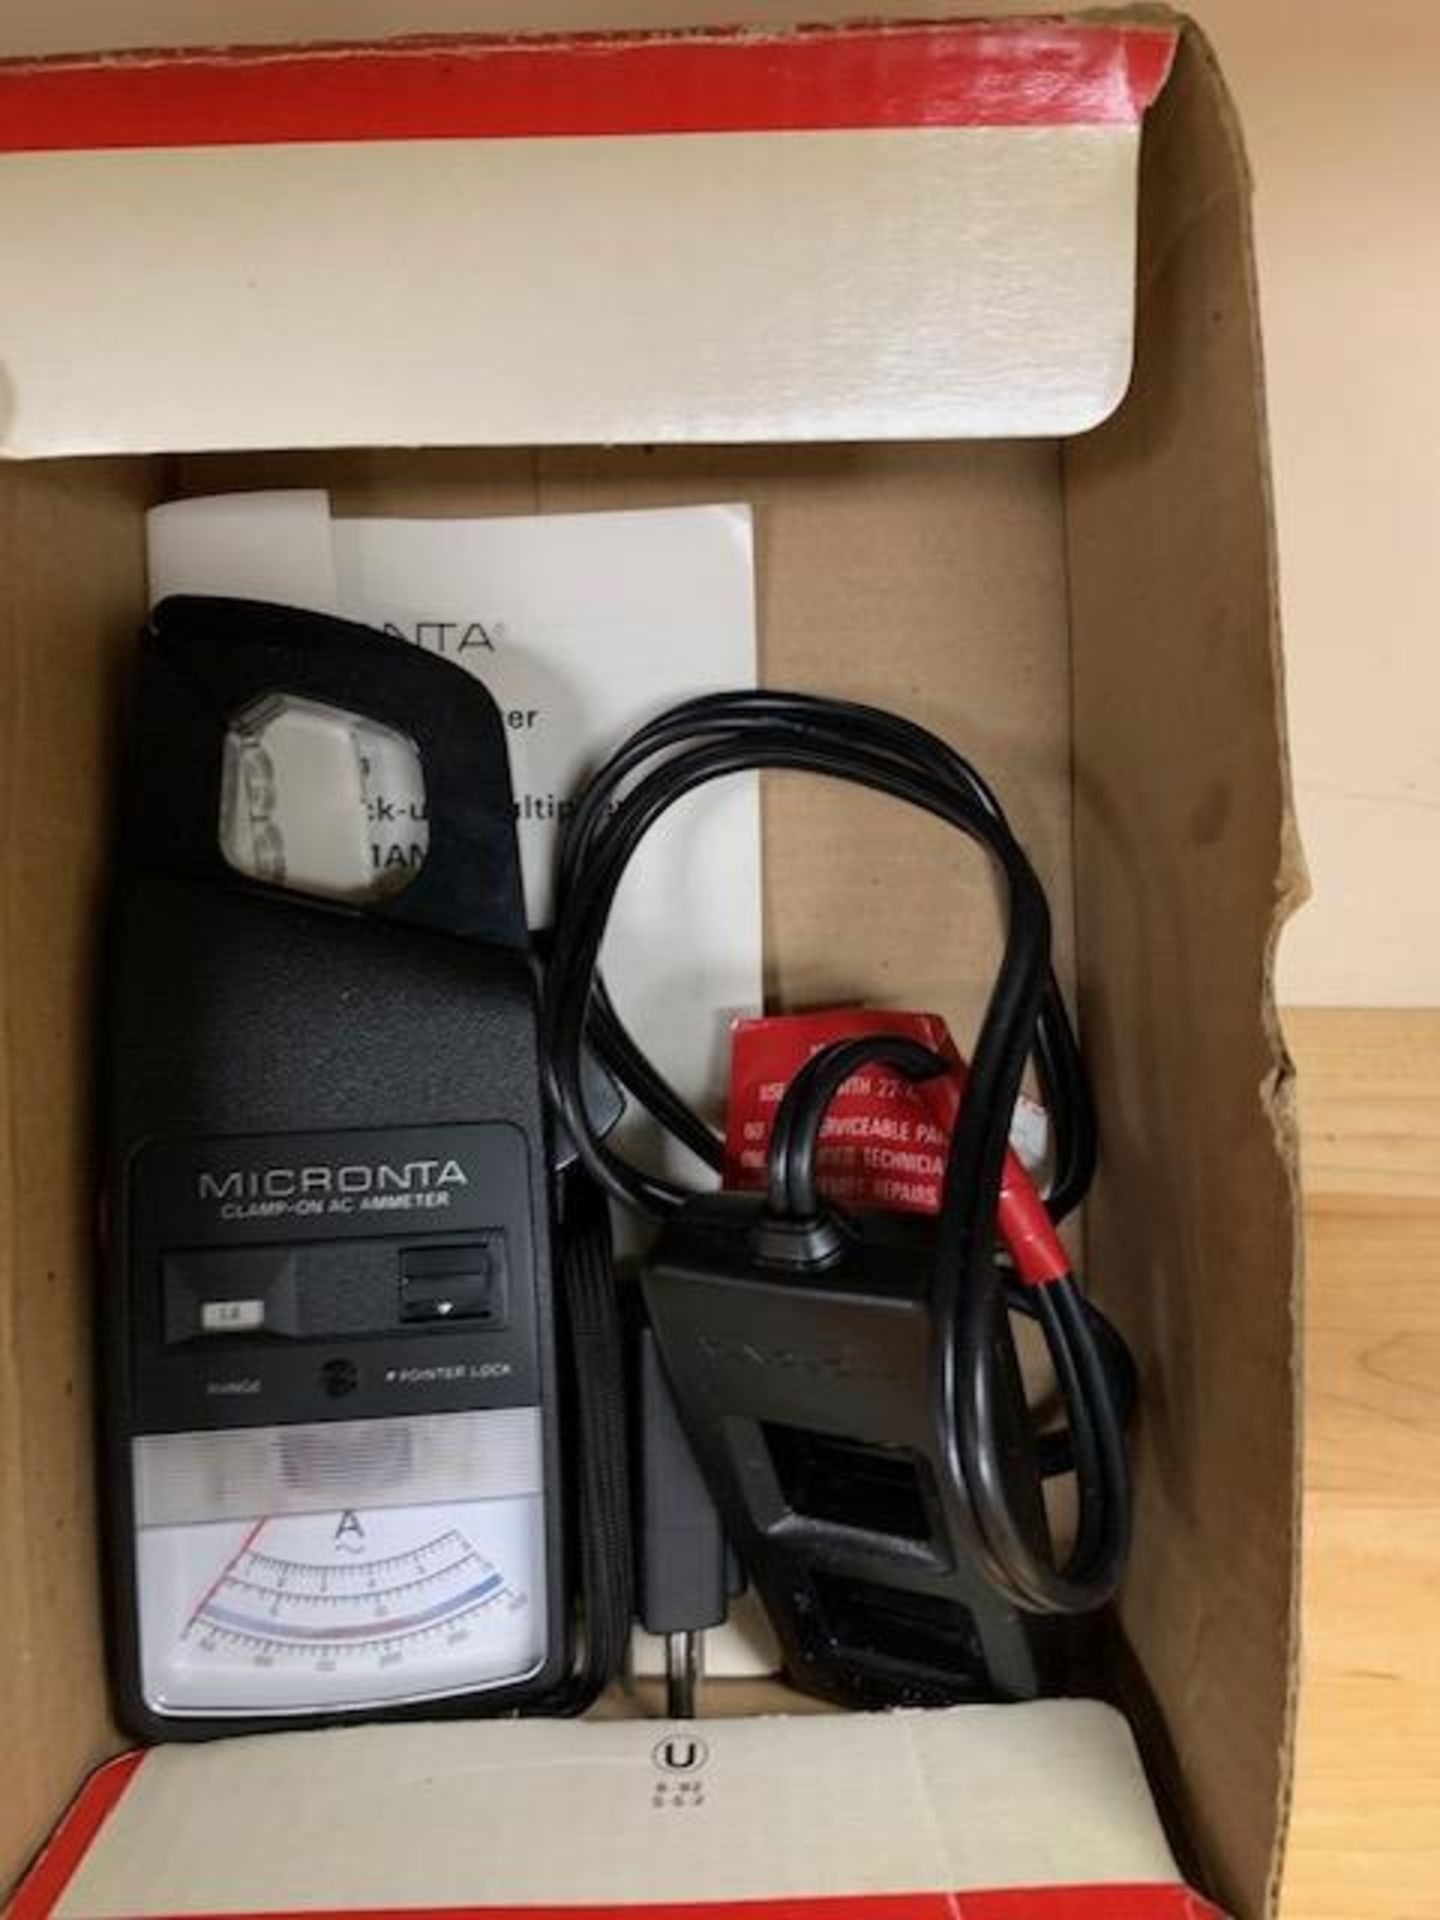 MICRONTA 22-214 RANGE MULTITESTER AND MICRONTA CLAMP ON AMMETER 22160 - Image 3 of 3